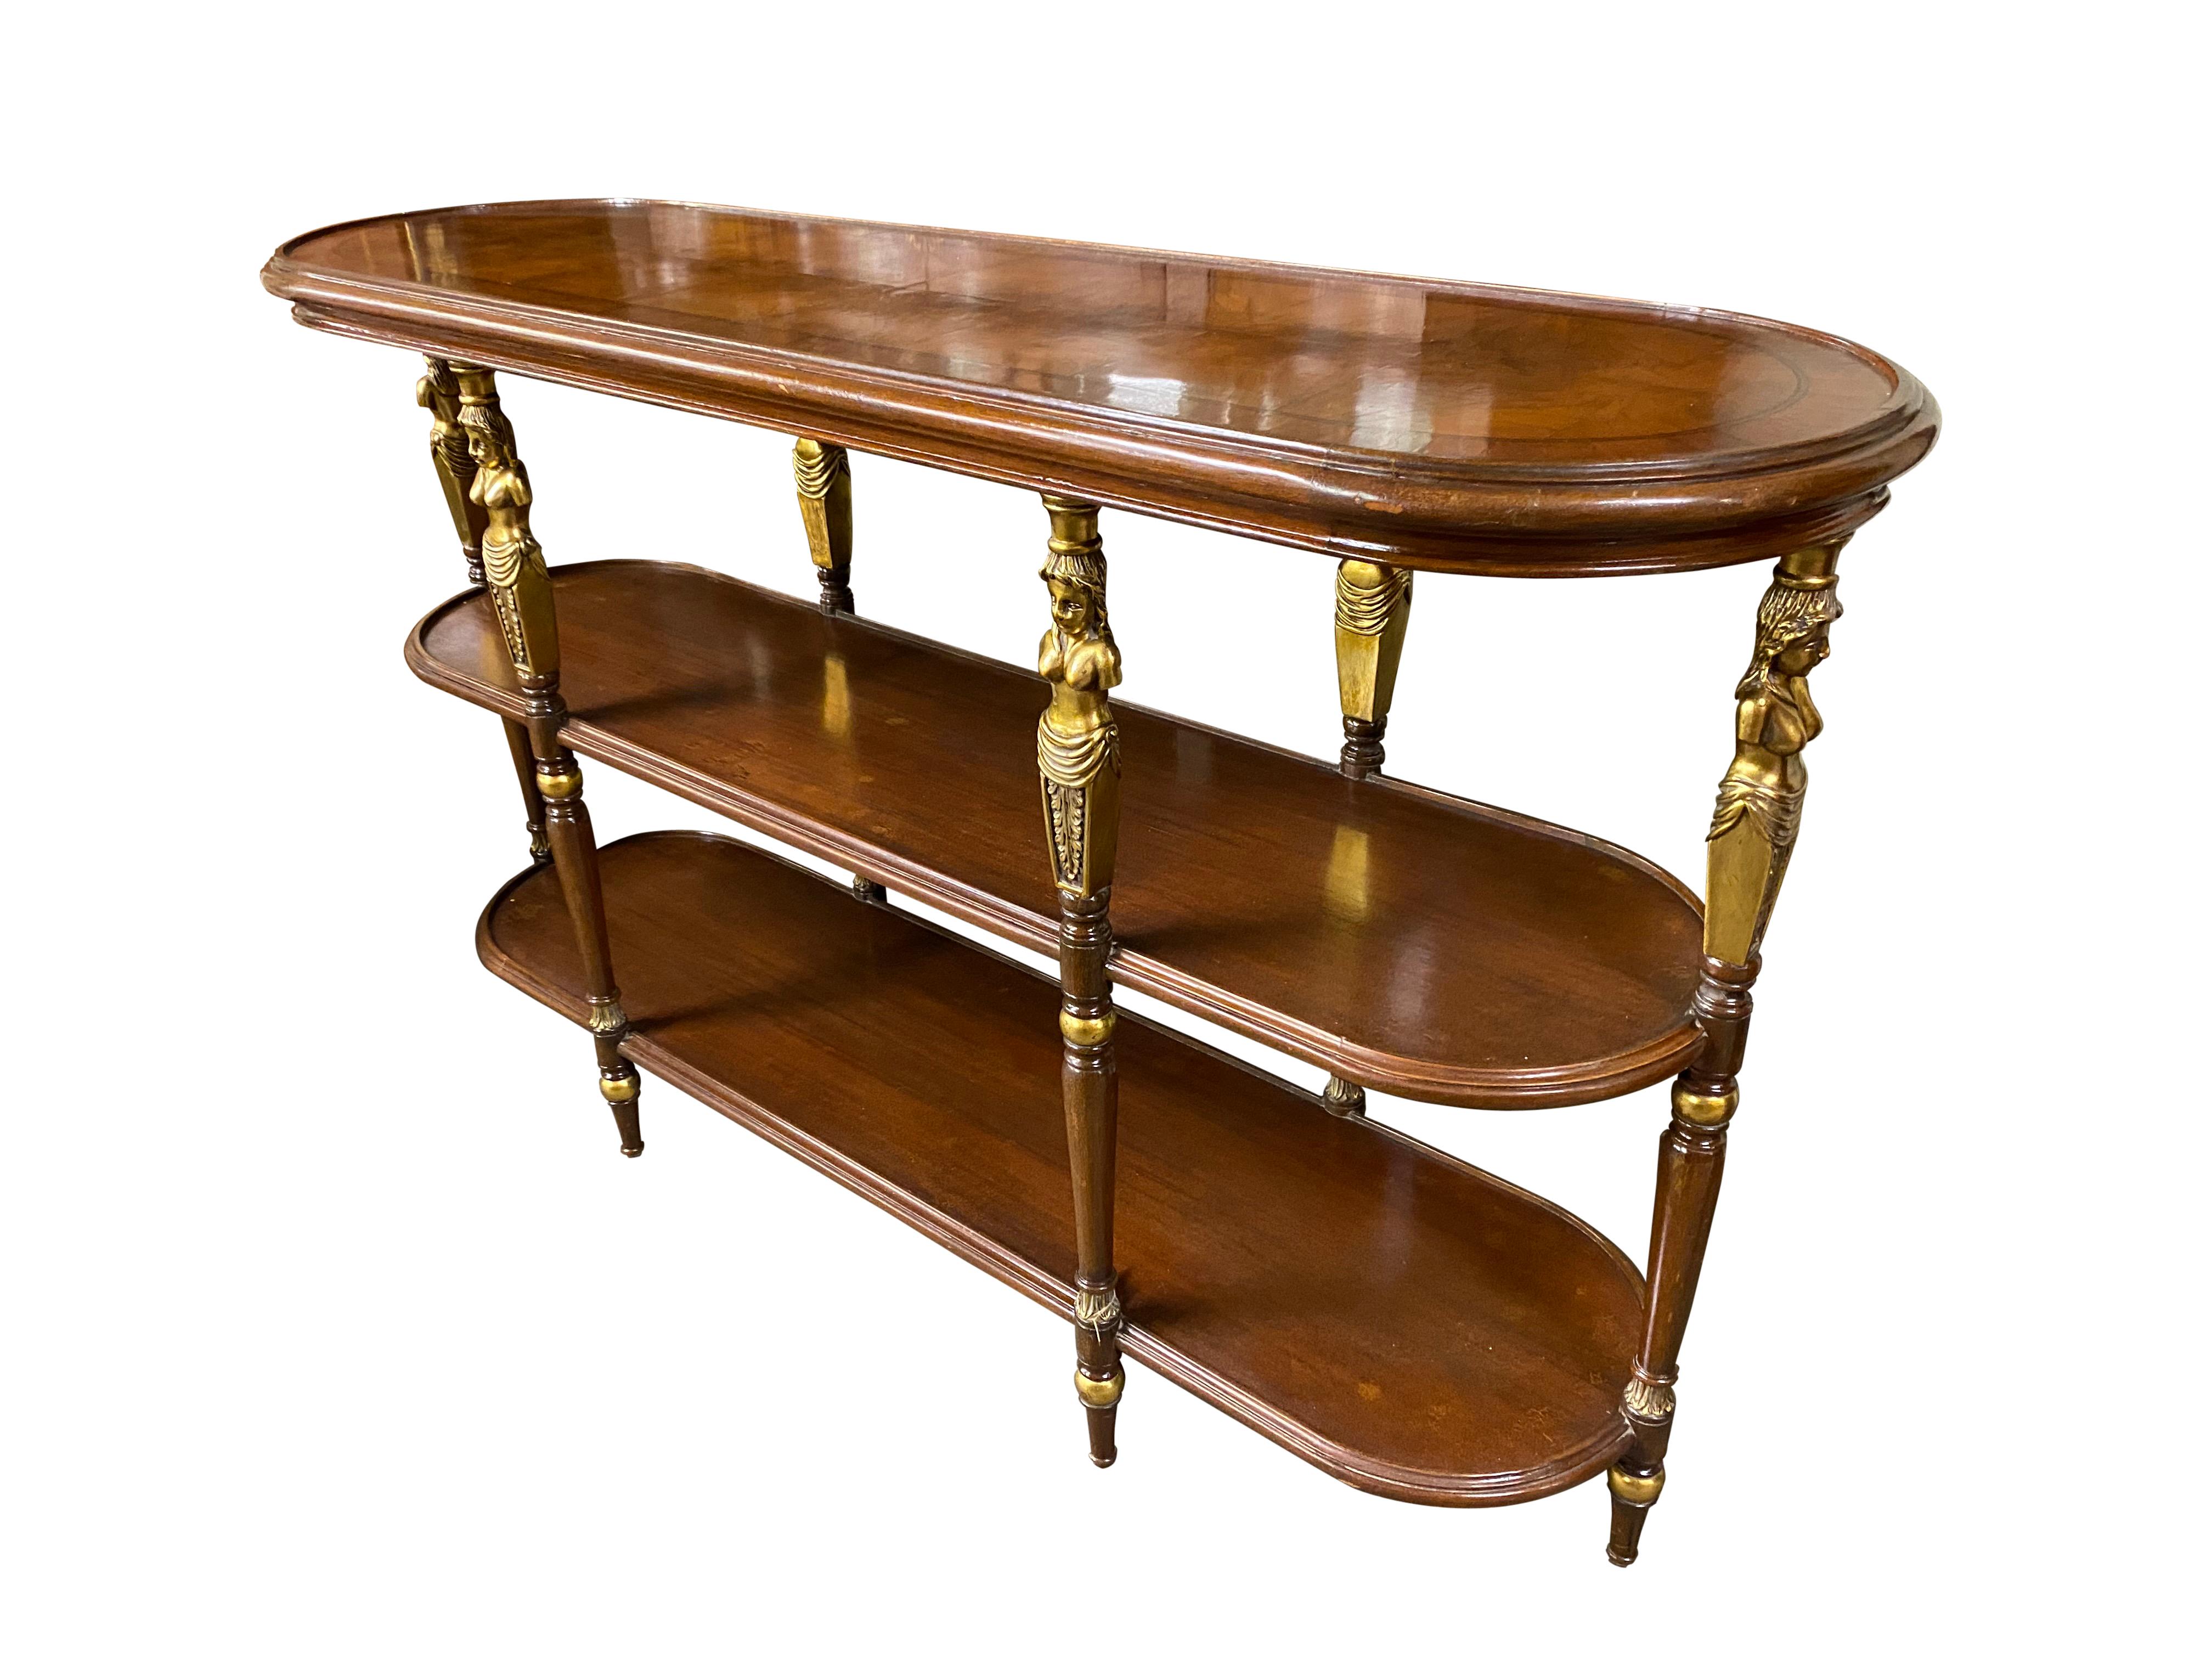 20th Century French Empire Style Open Bookcase/Etagere Tiered Table For Sale 1